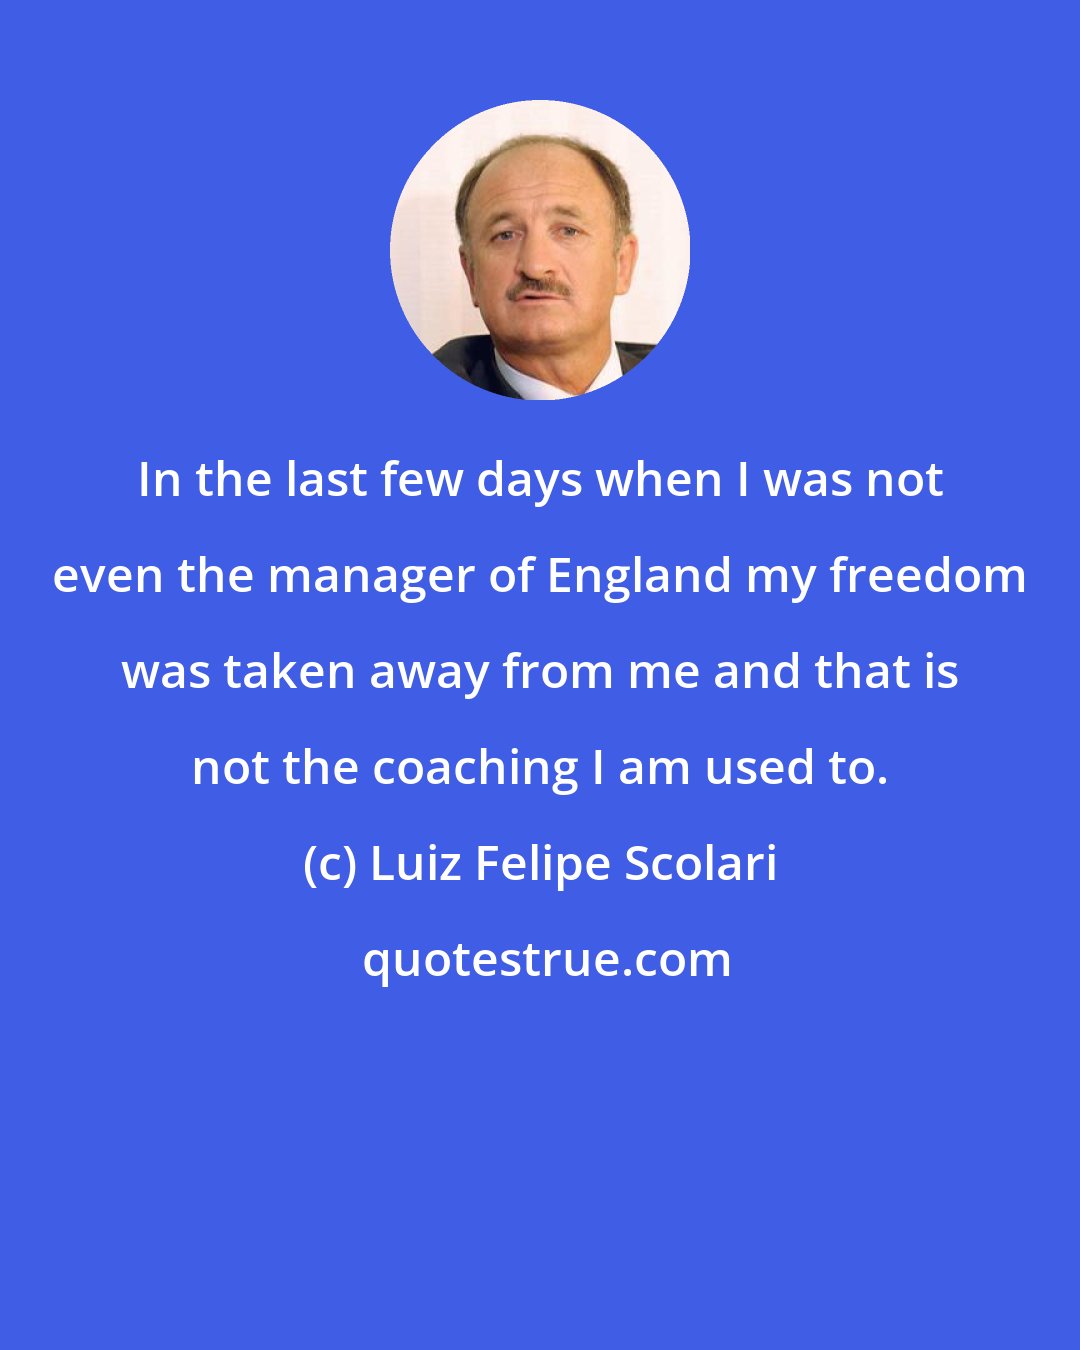 Luiz Felipe Scolari: In the last few days when I was not even the manager of England my freedom was taken away from me and that is not the coaching I am used to.